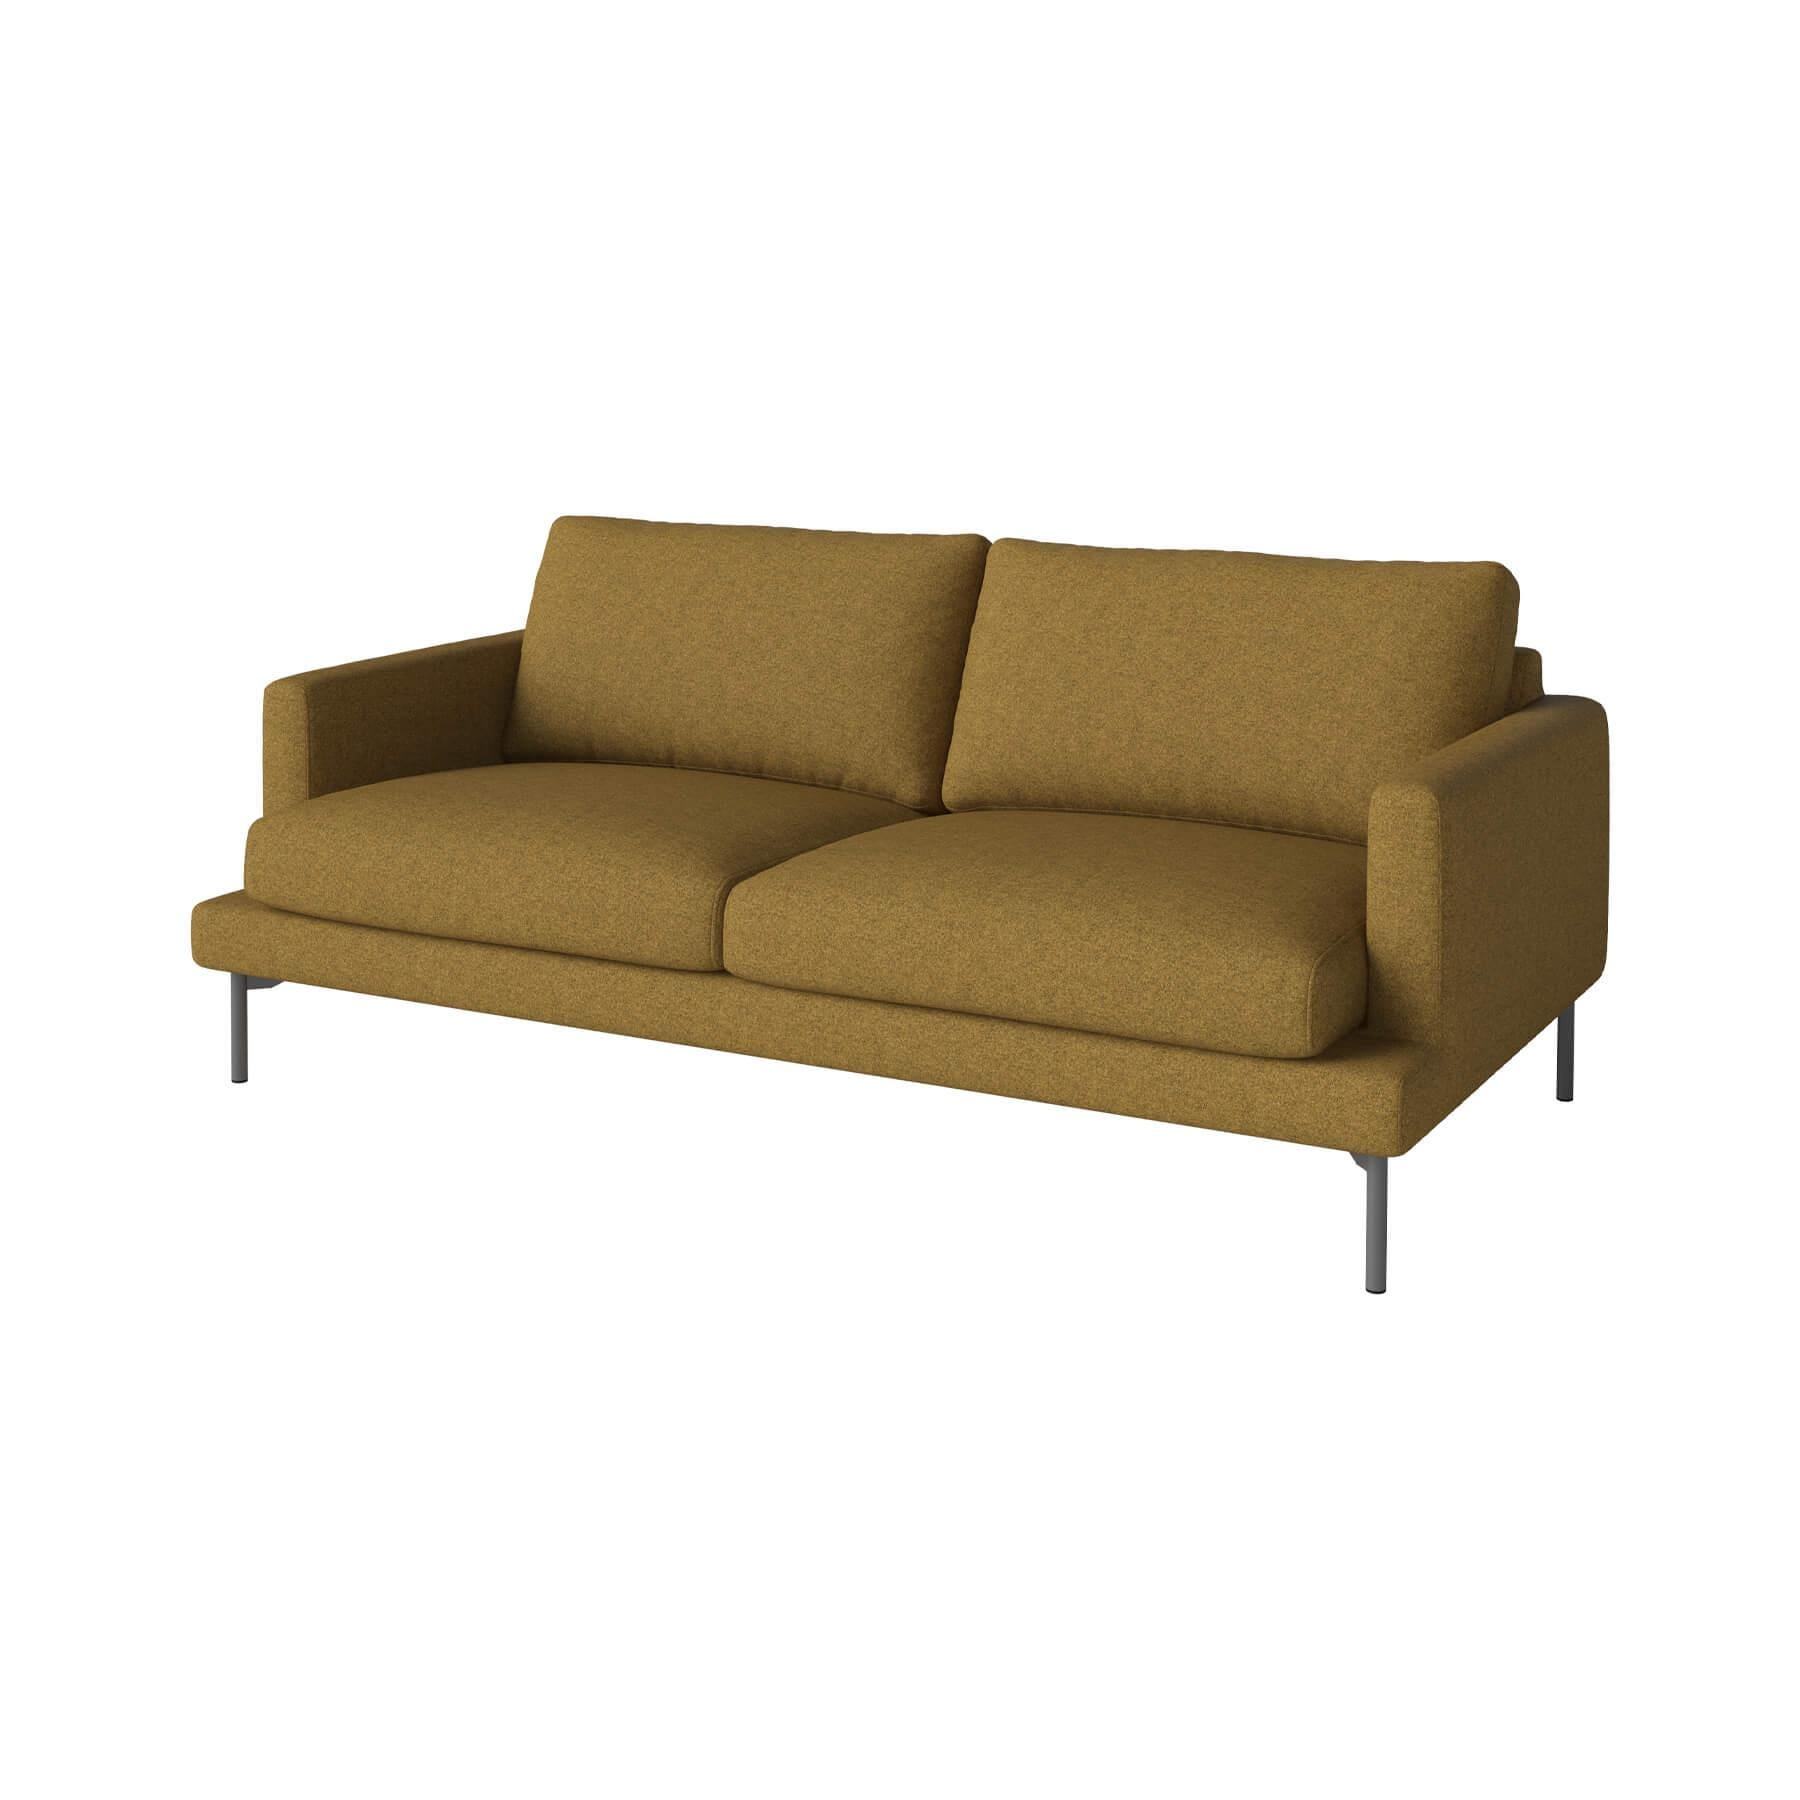 Bolia Veneda Sofa 25 Seater Sofa Grey Laquered Steel Qual Curry Brown Designer Furniture From Holloways Of Ludlow